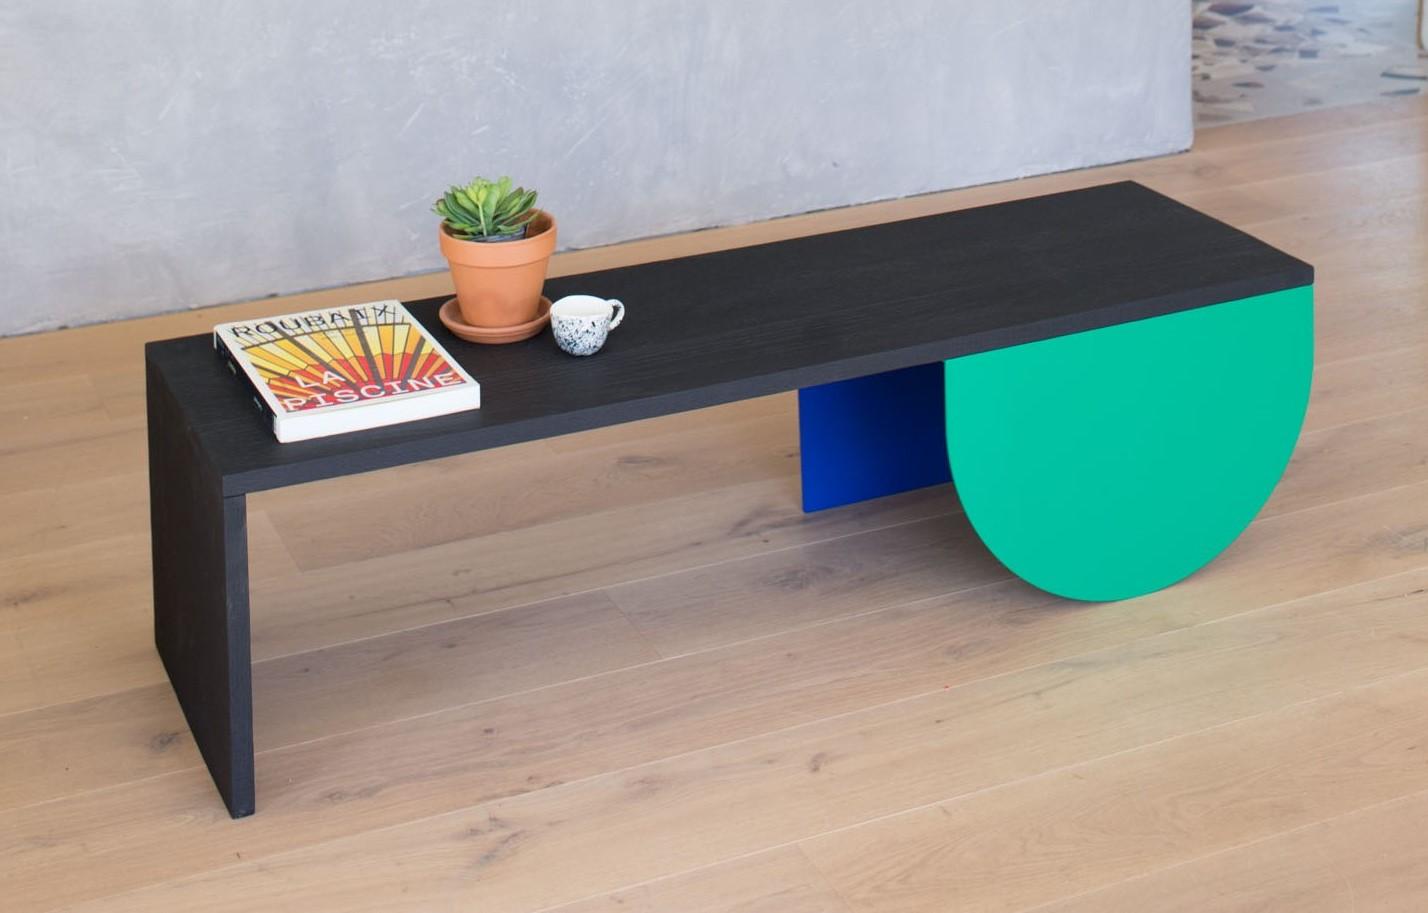 Green and Blue Babel One coffee table by Babel Brune.
Dimensions: D 42 x W 130 x H 30 cm.
Material: Charred brushed oak wood, oil finish, powder-coated steel.

An iconic piece, the Babylone Blue coffee table honours the Japanese tradition of